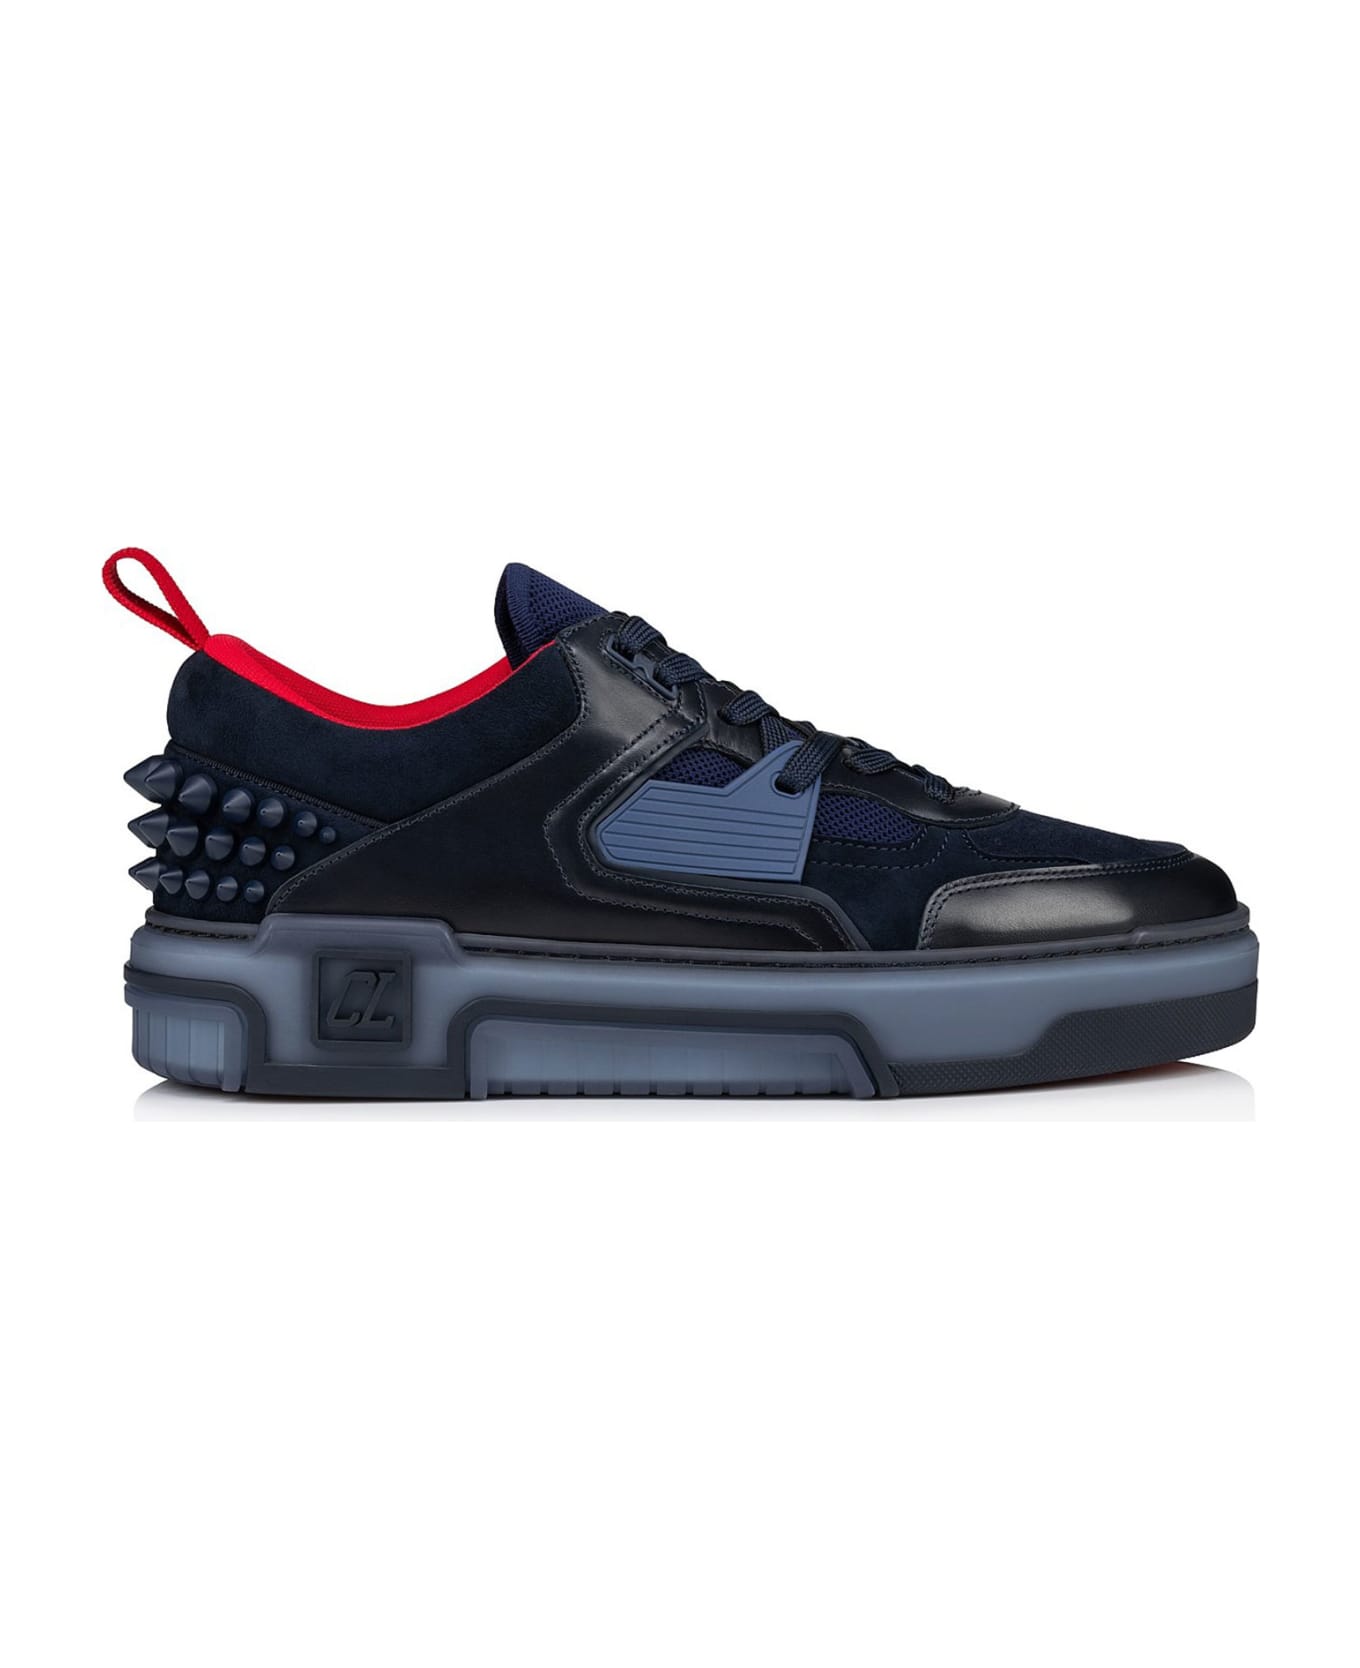 Christian Louboutin Astroloubi Sneakers In Calf Leather And Suede - MARINE